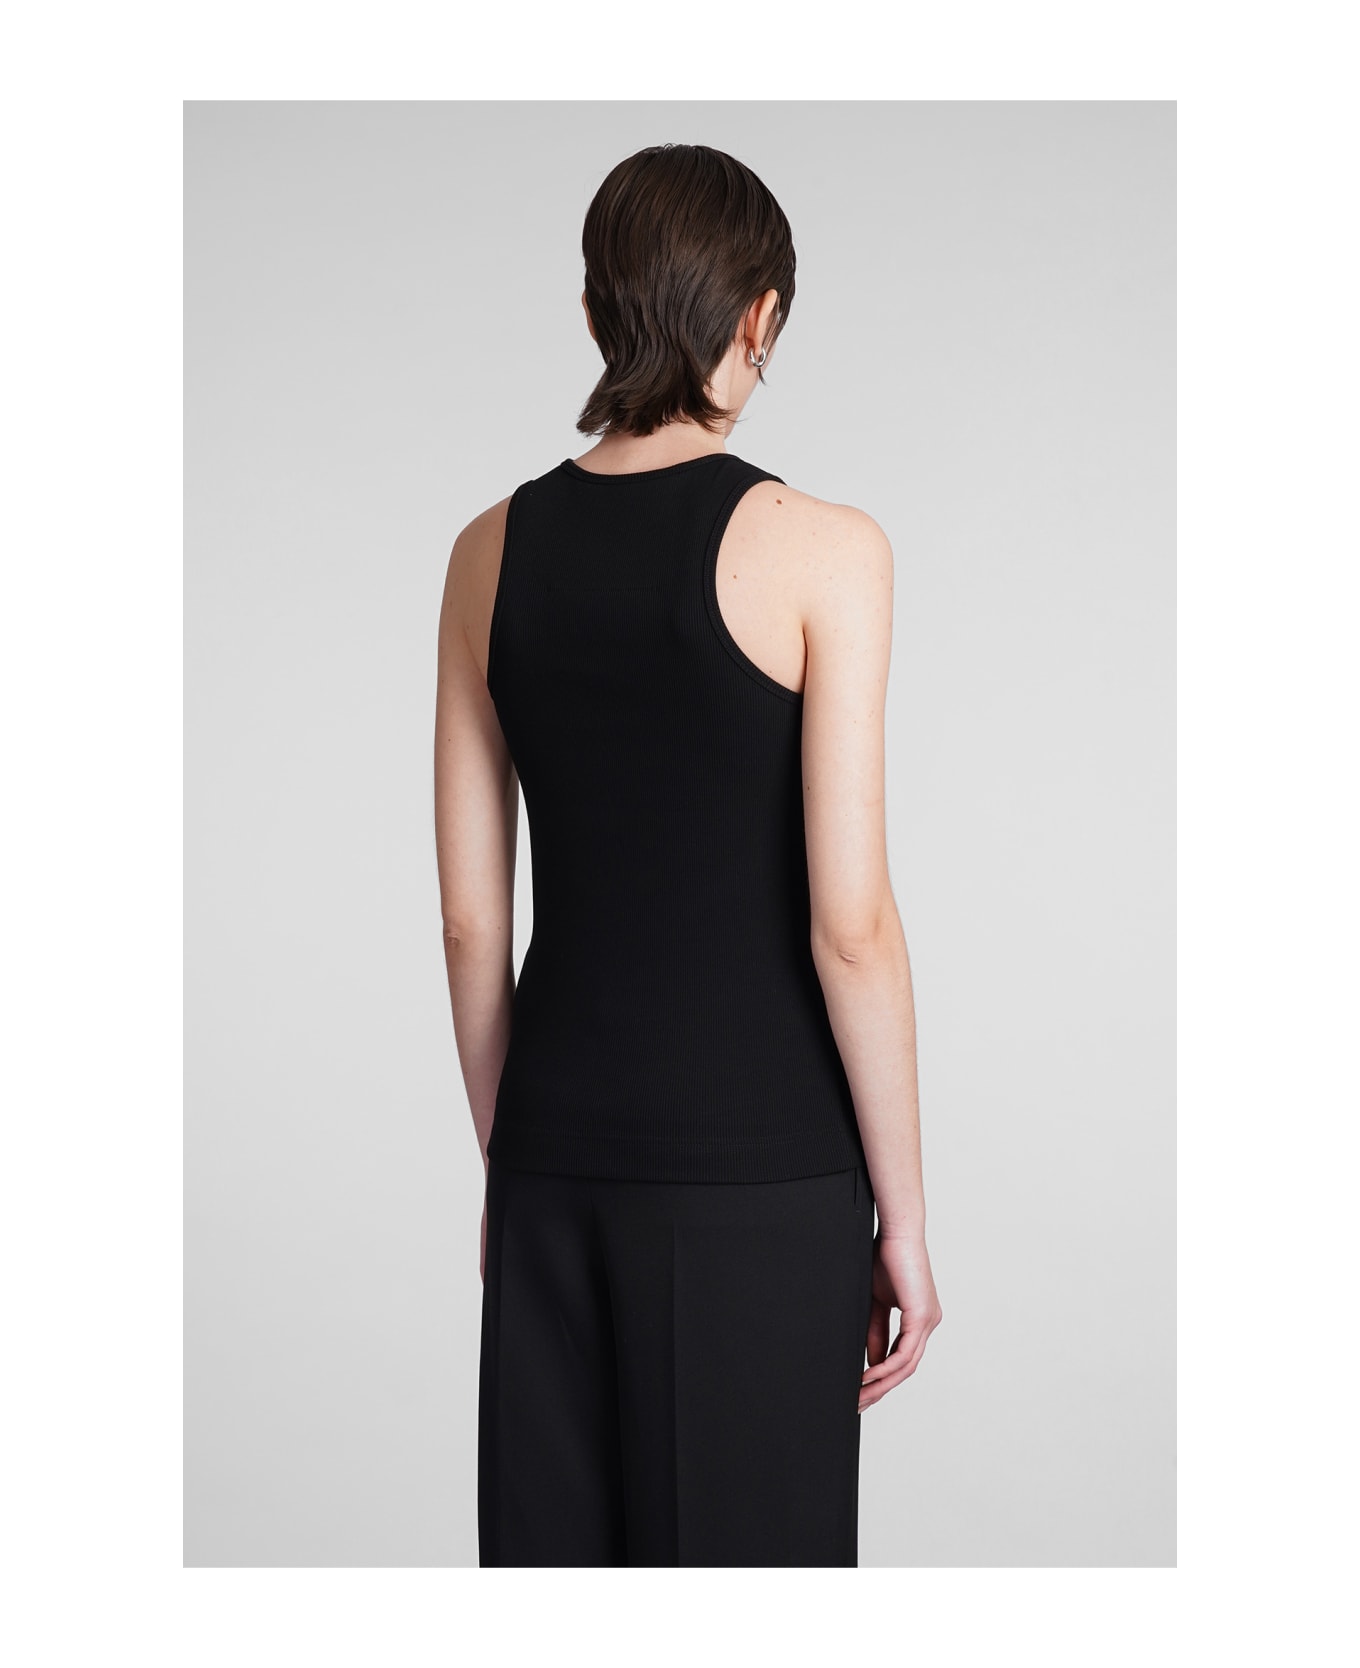 Givenchy Tank Top In Black Cotton - black